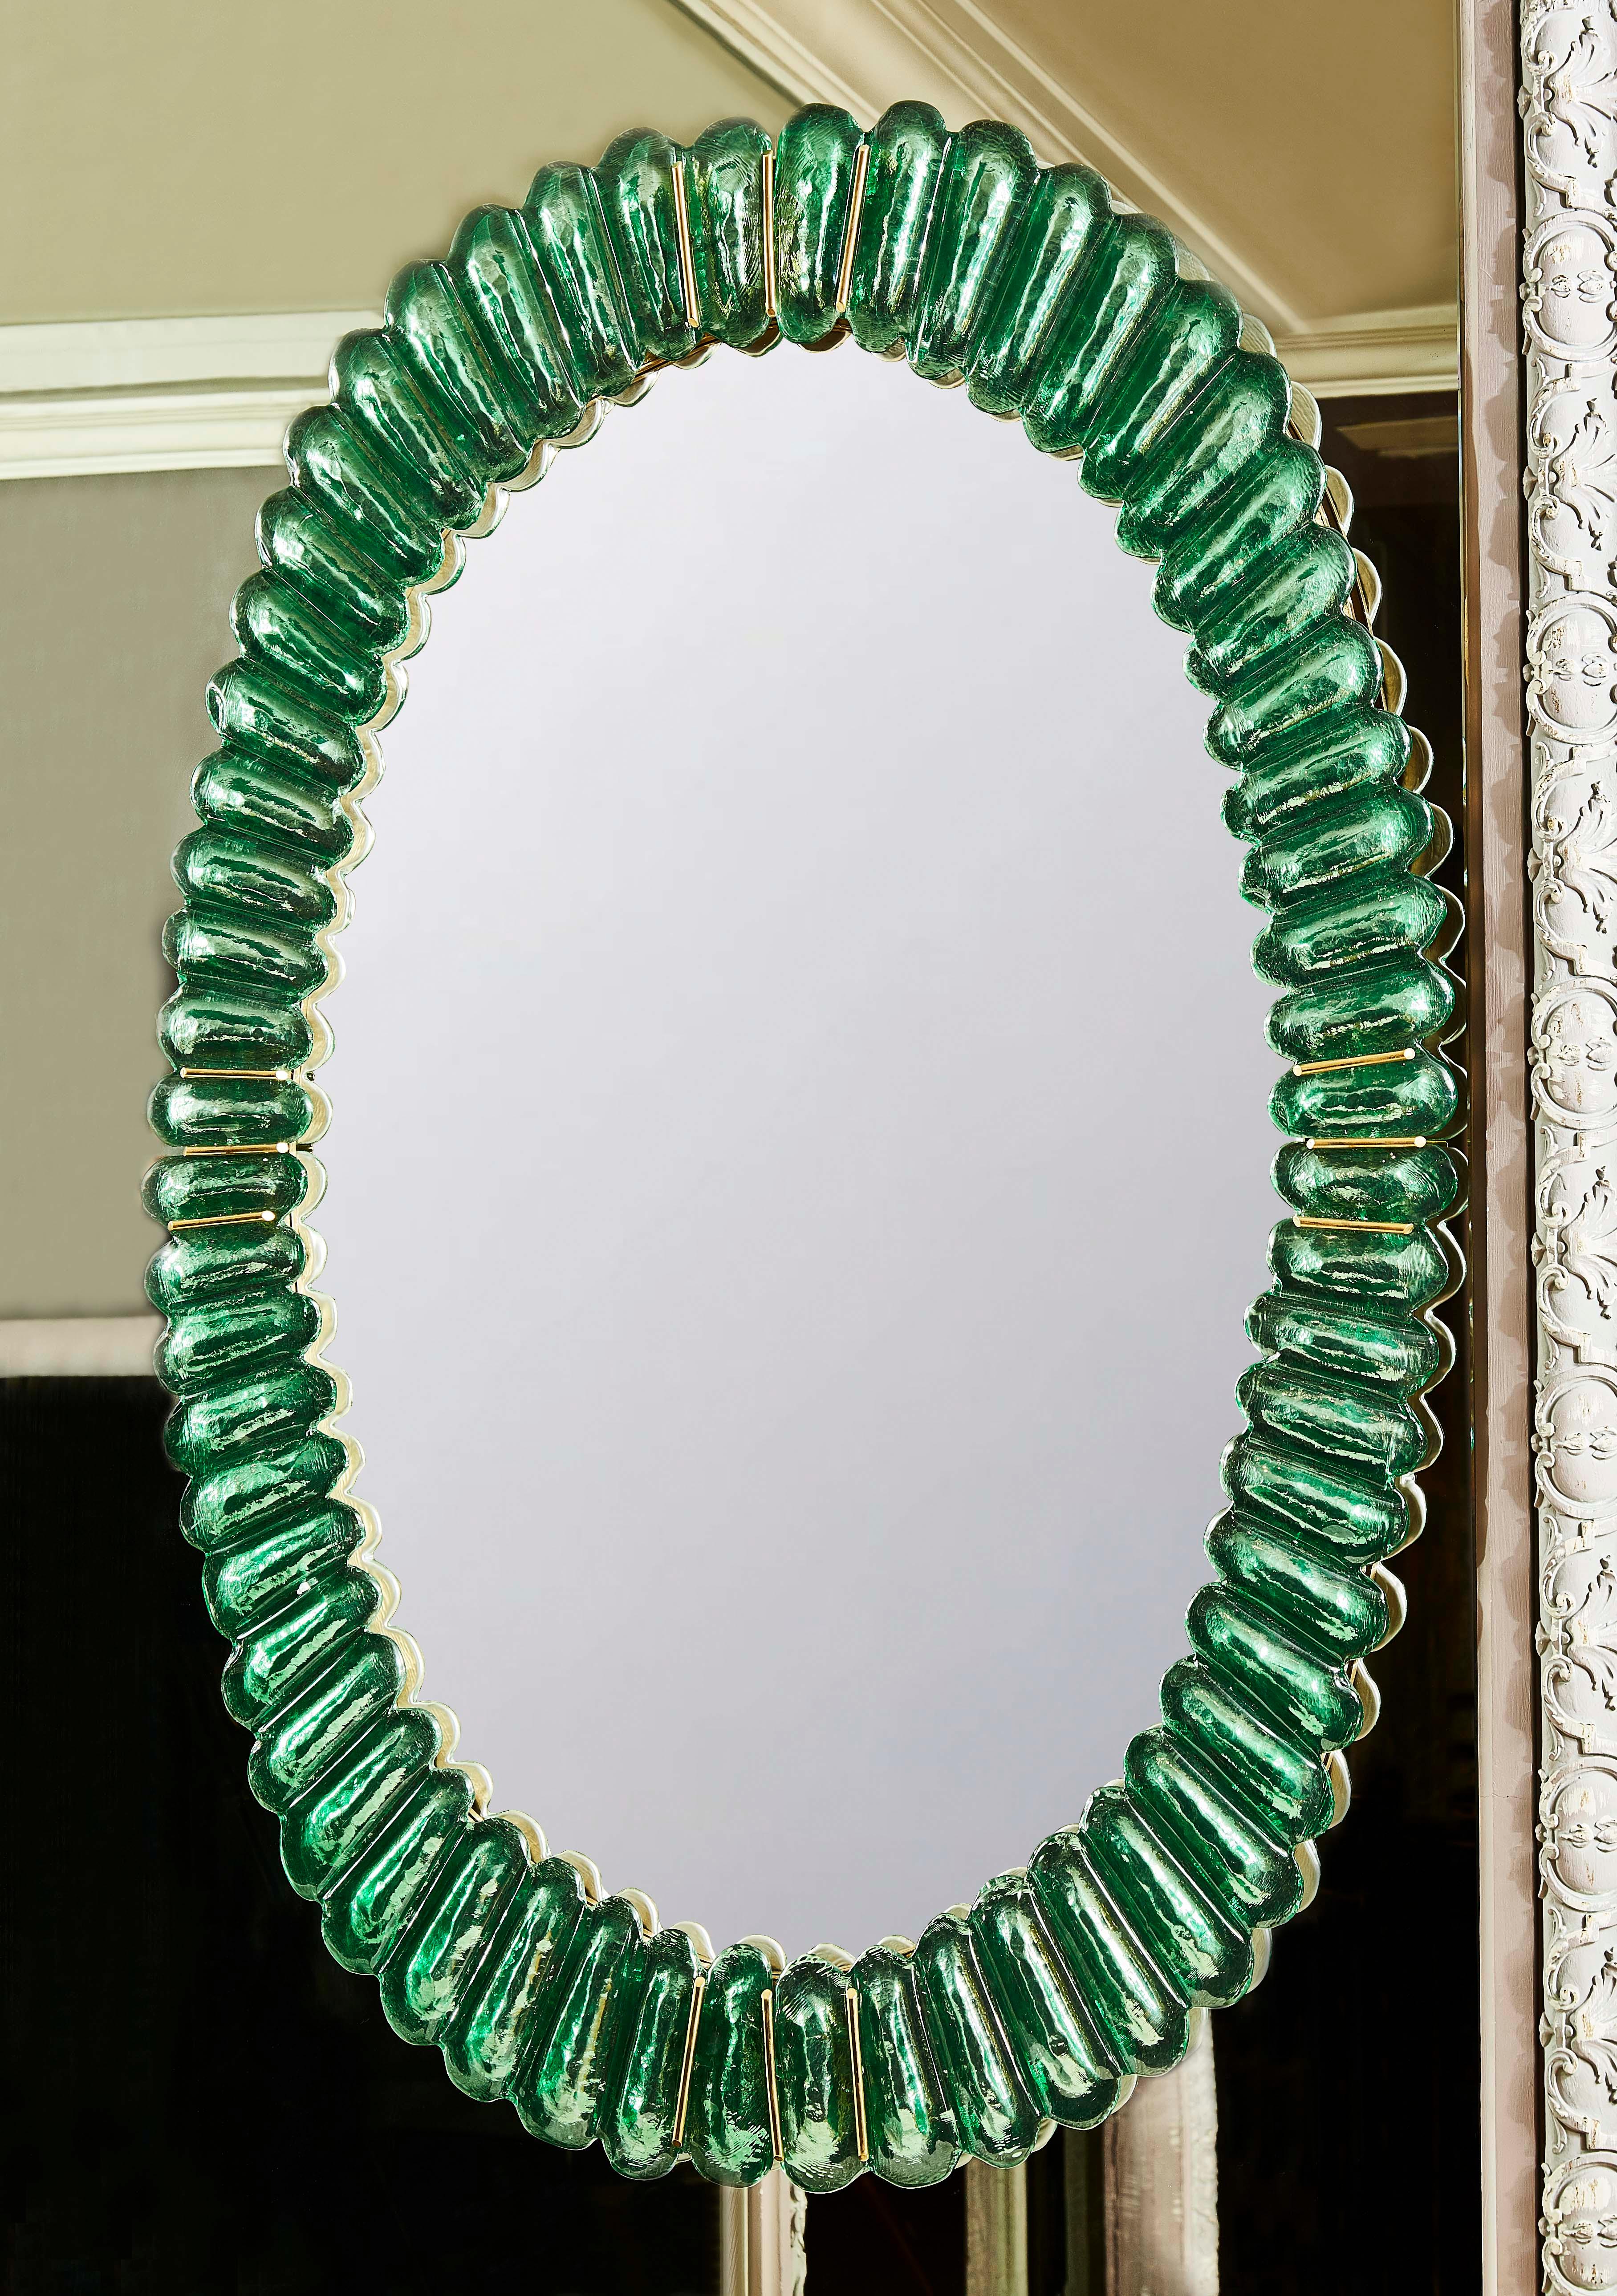 Pair of vintage oval mirrors made of green Murano glass and brass inlays,
Italy, 1970s style.